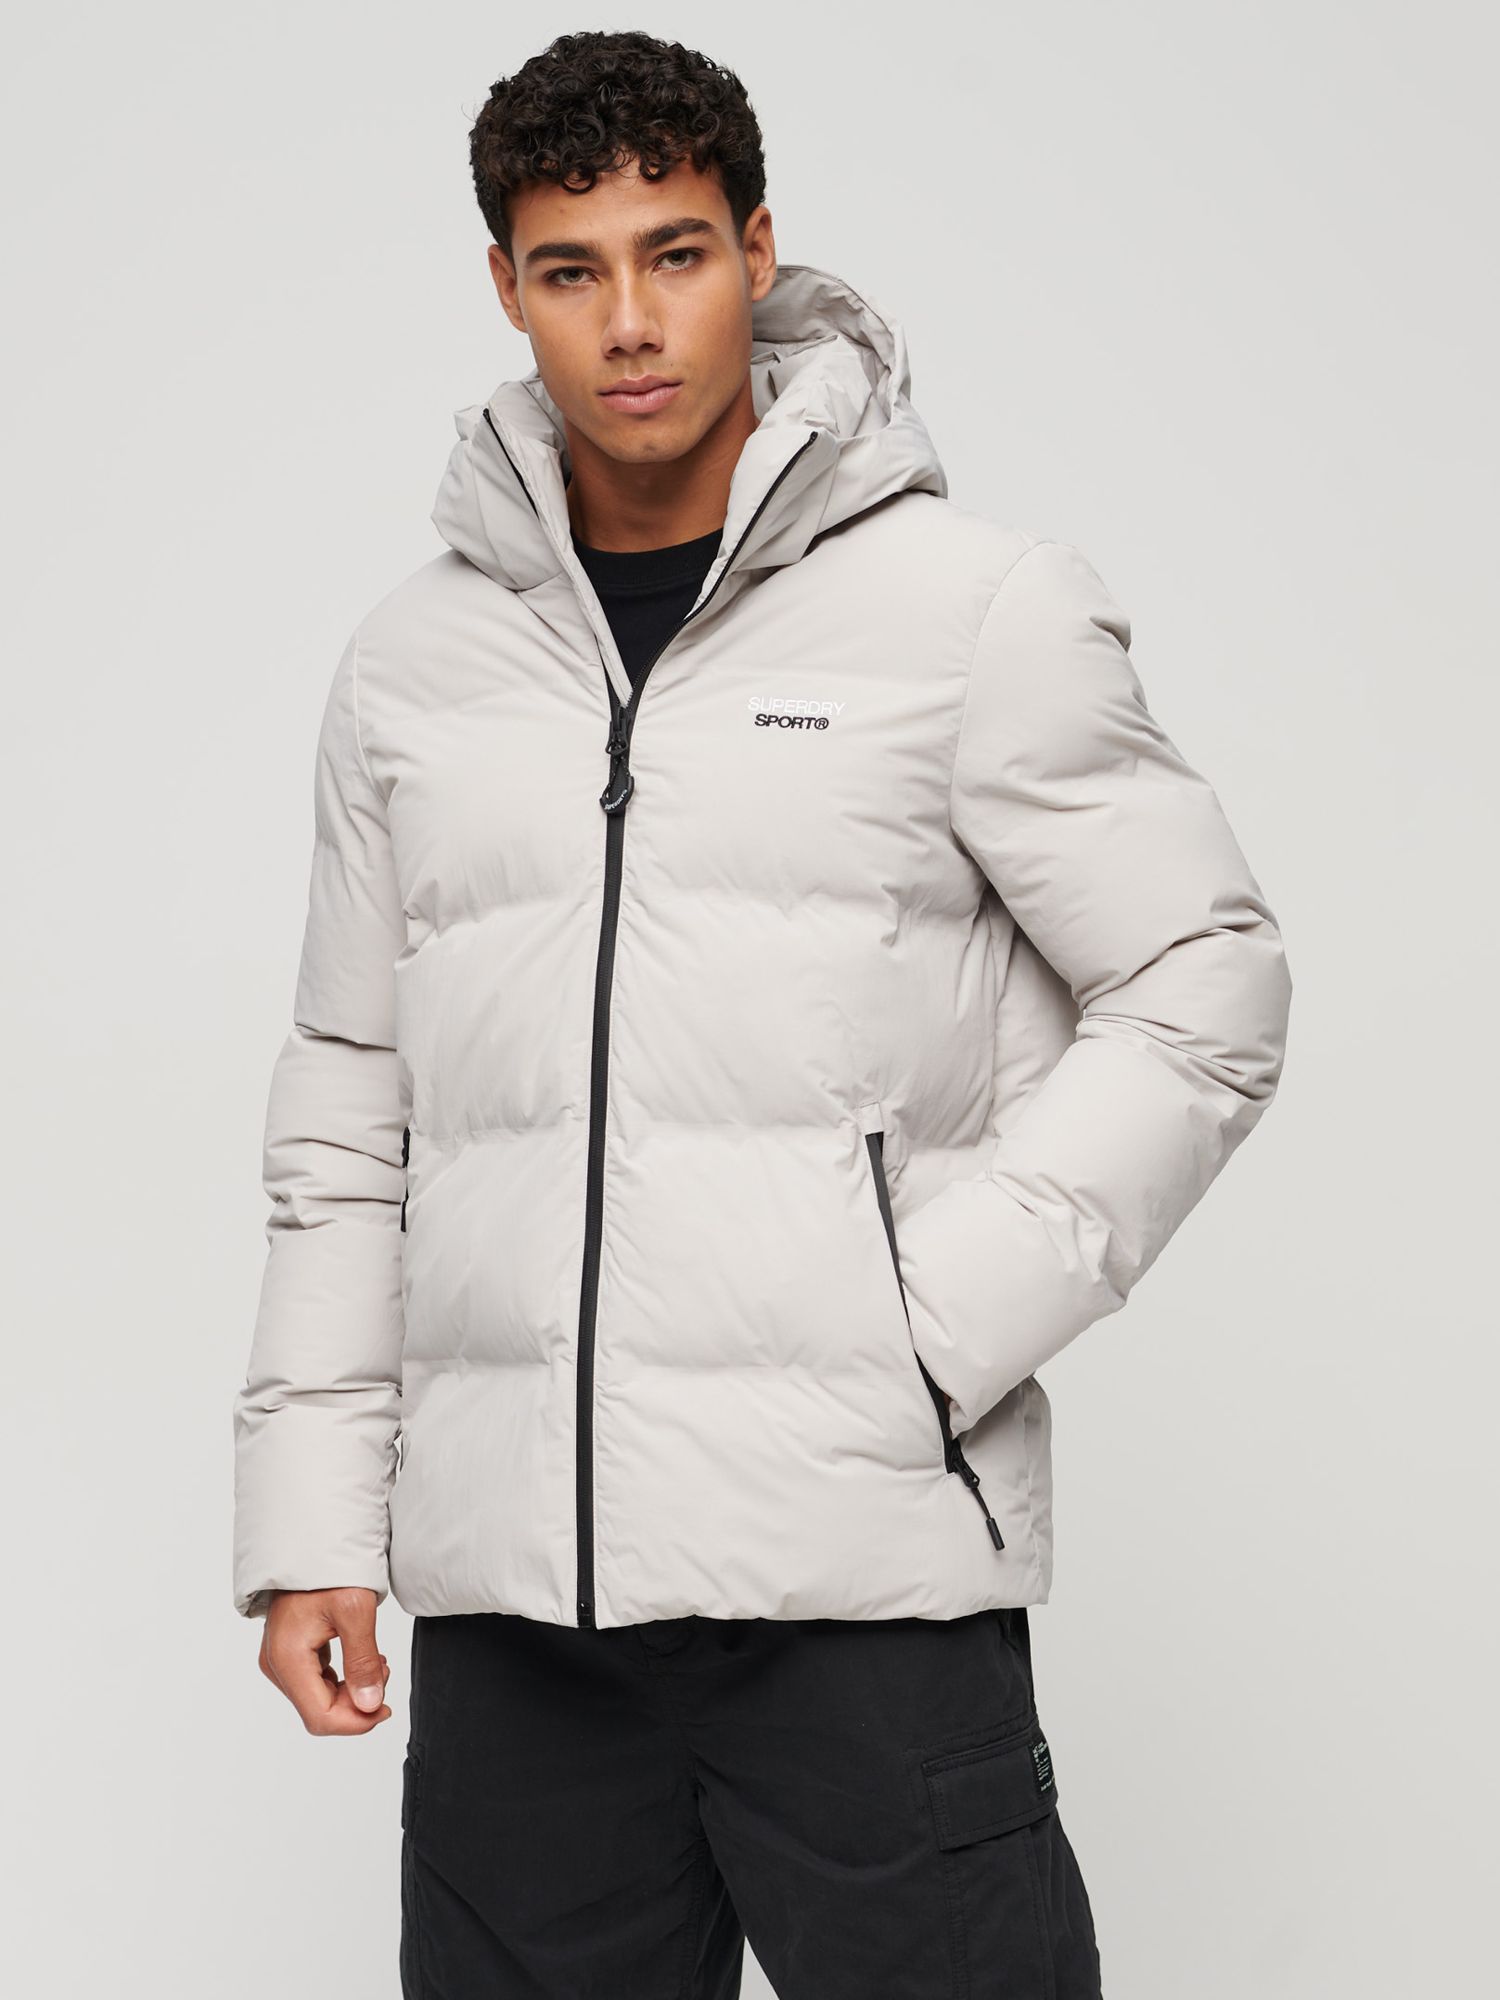 Partners & John Moonlight Puffer Lewis Hooded Grey at Boxy Superdry Jacket,